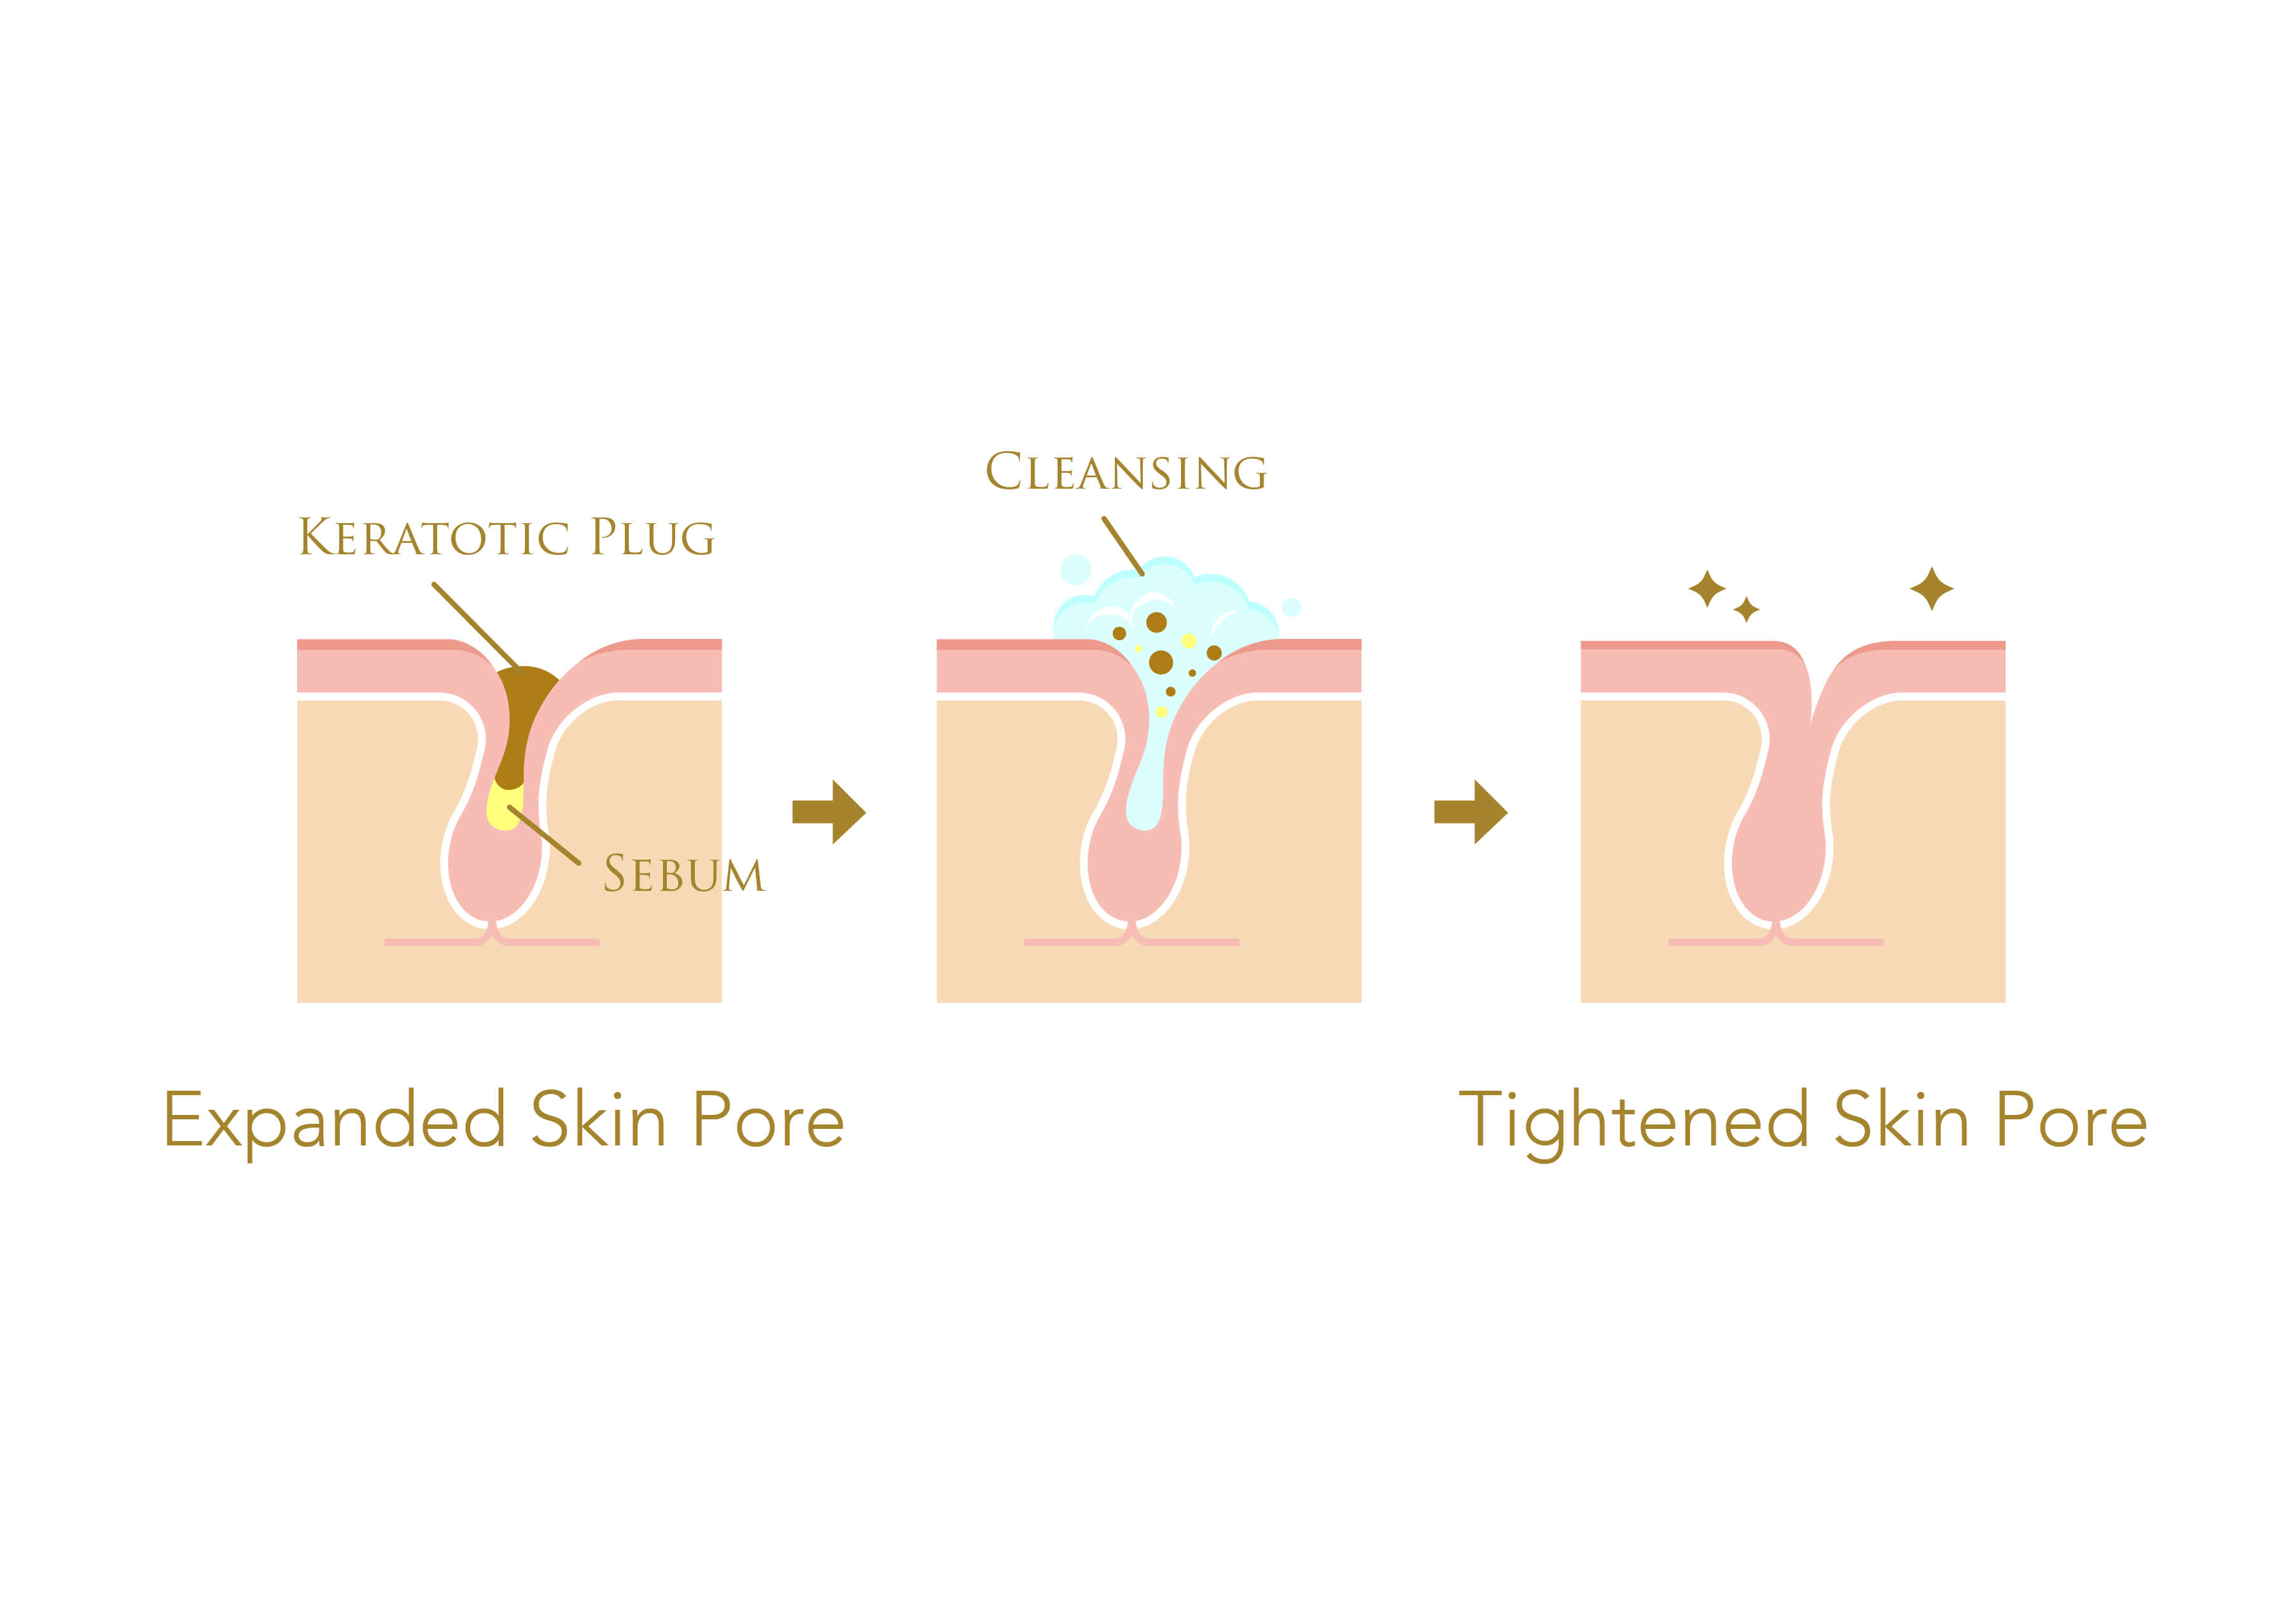 Infographic on how cleansing removes clogged pores